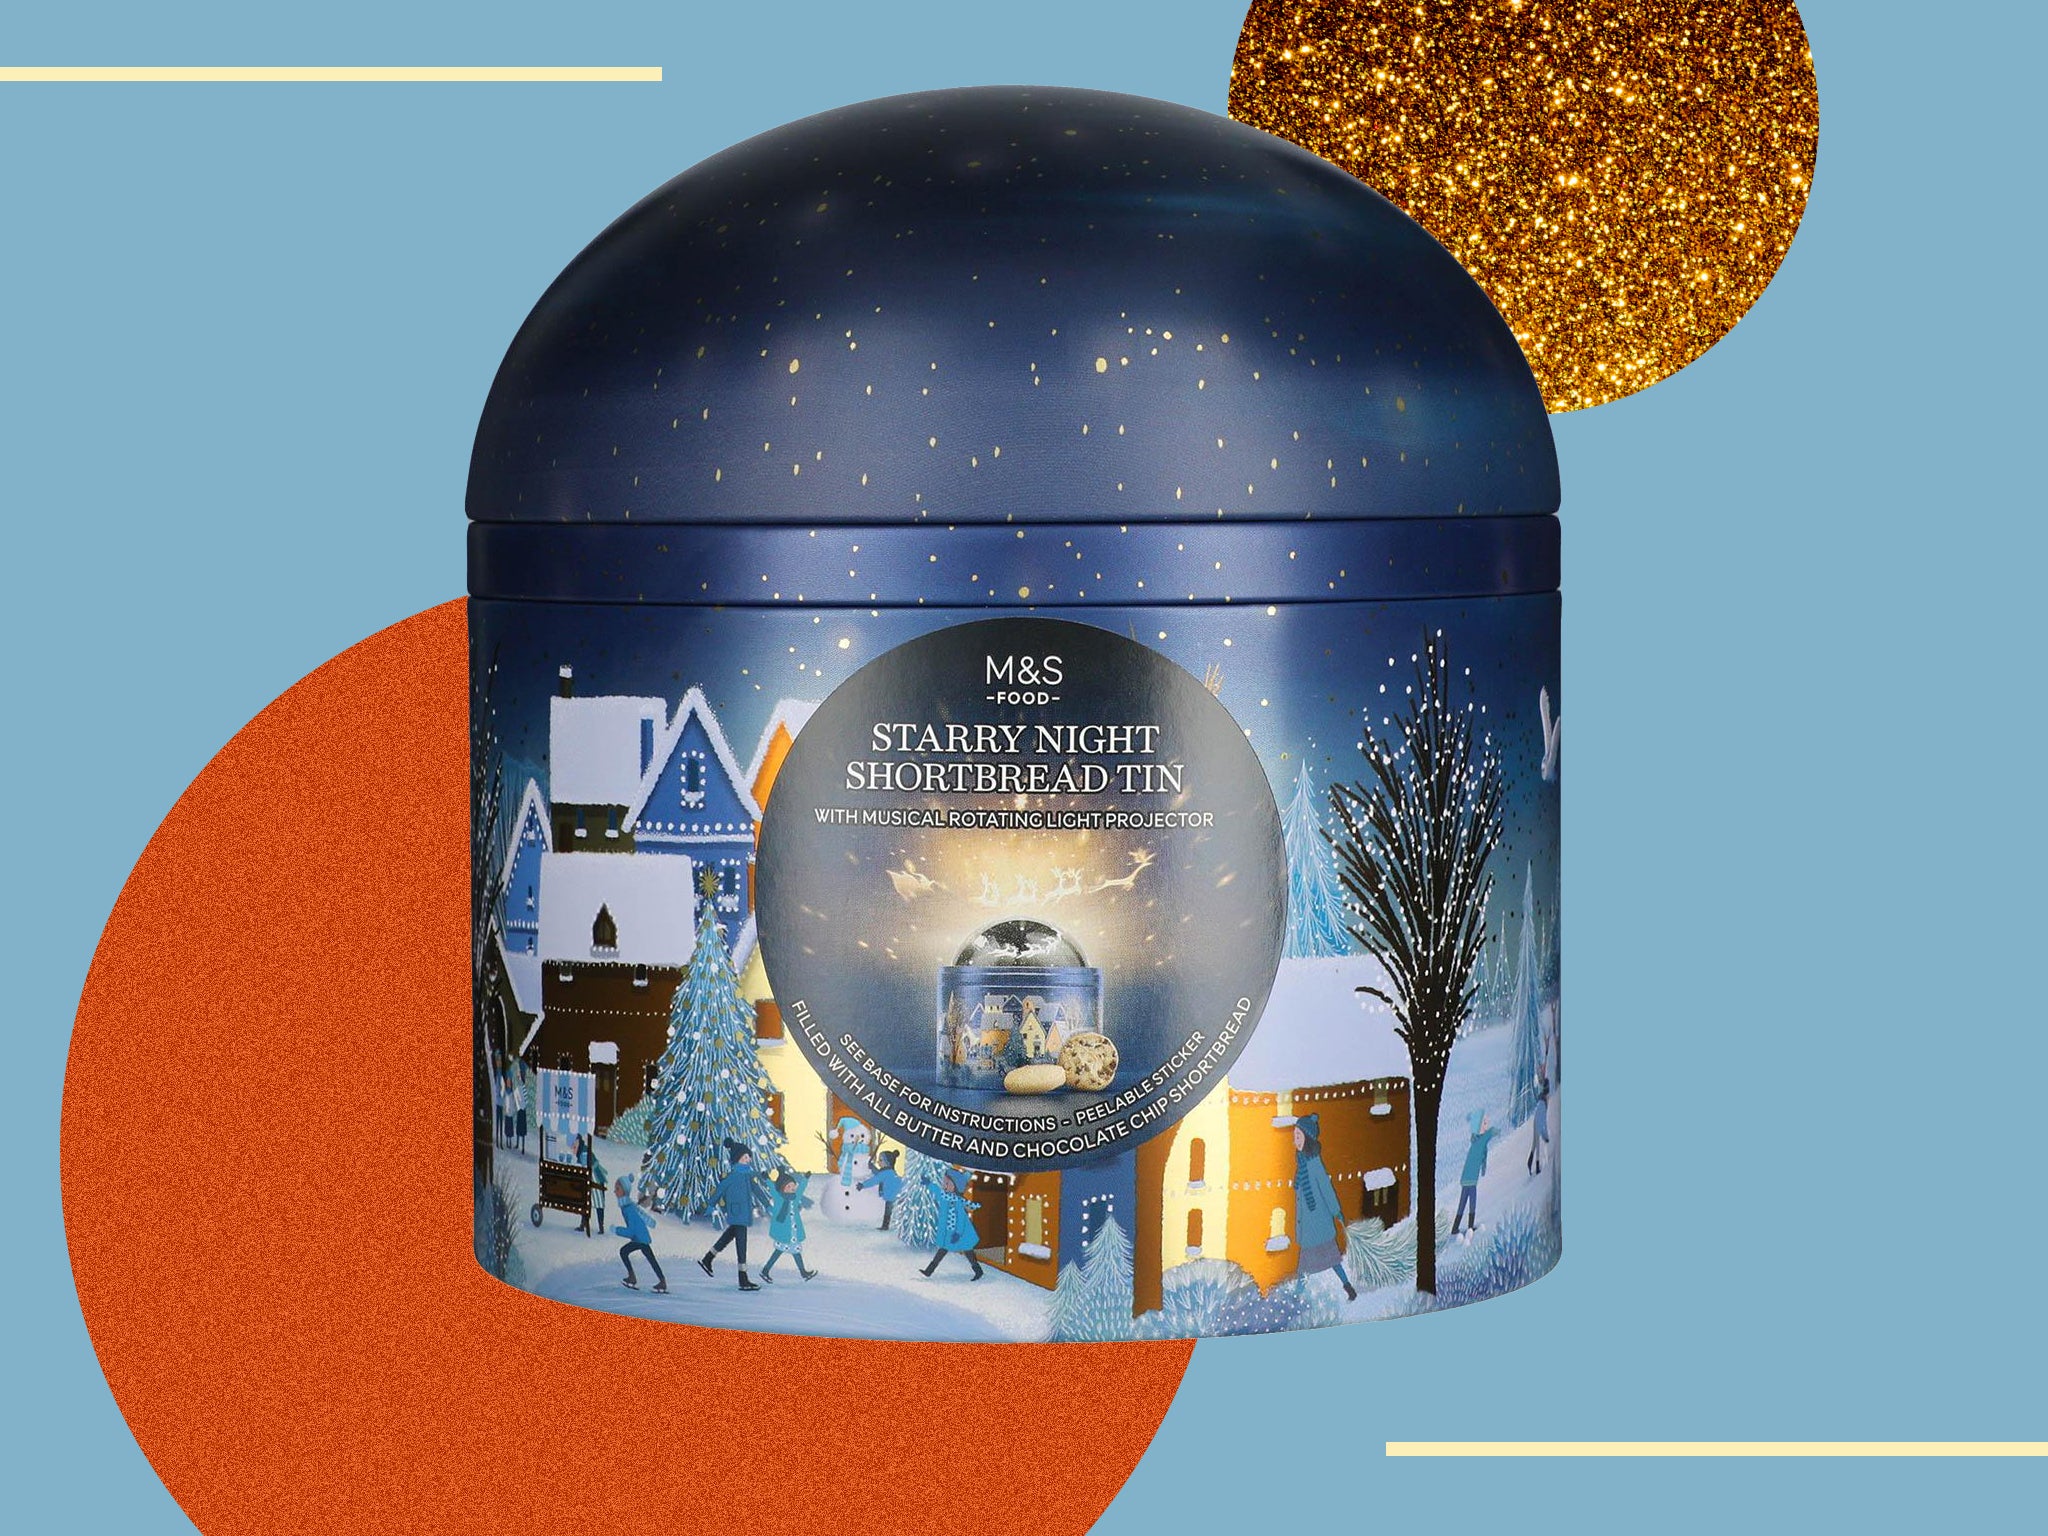 At less than £10, the tin is perfect for secret-Santa gifting